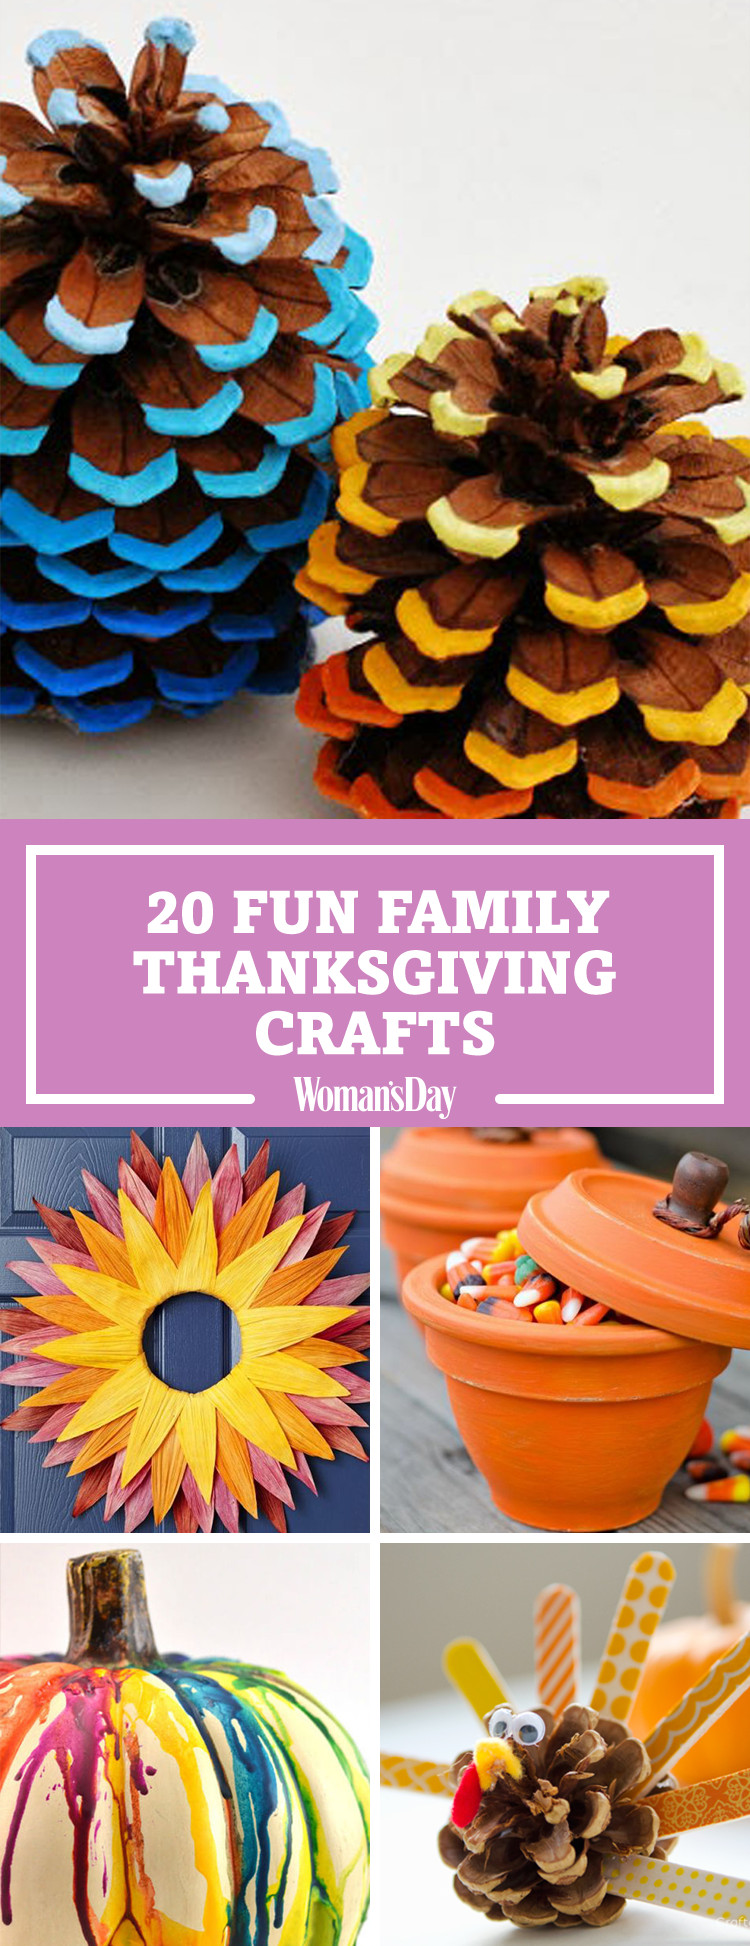 Turkey Ideas For Thanksgiving
 29 Fun Thanksgiving Crafts for Kids Easy DIY Ideas to